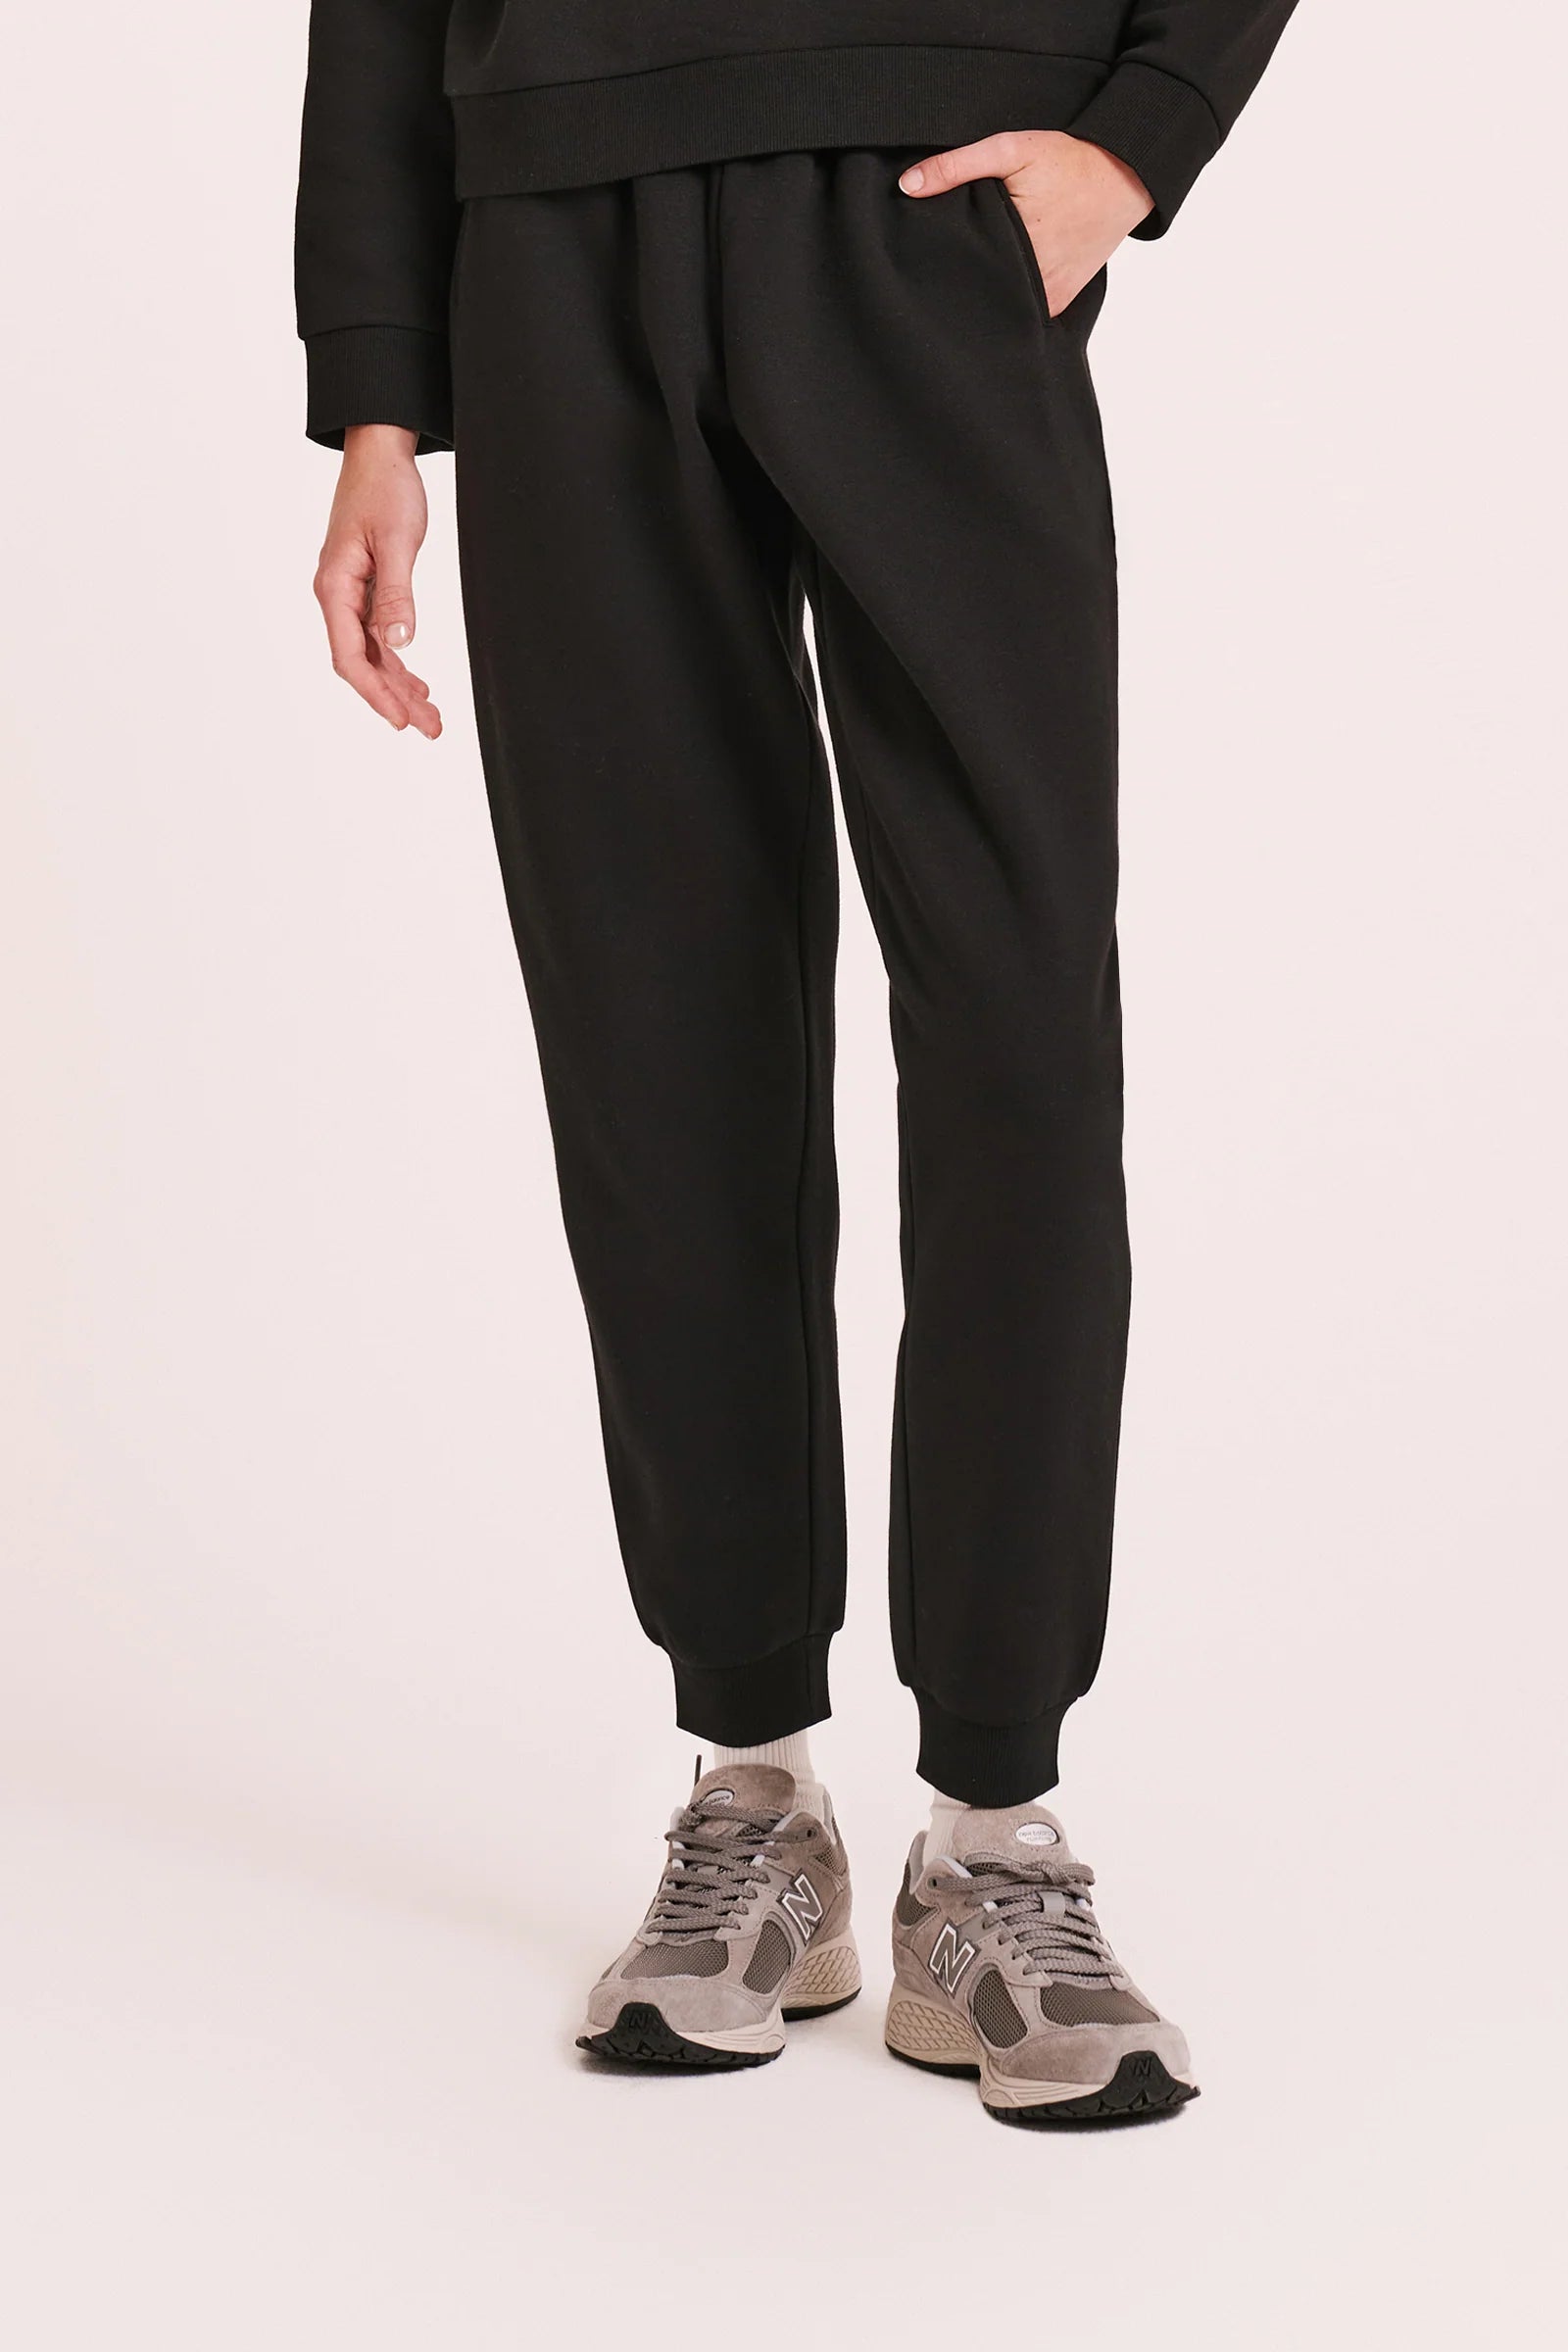 Nude Lucy | Carter Classic Trackpant - Black